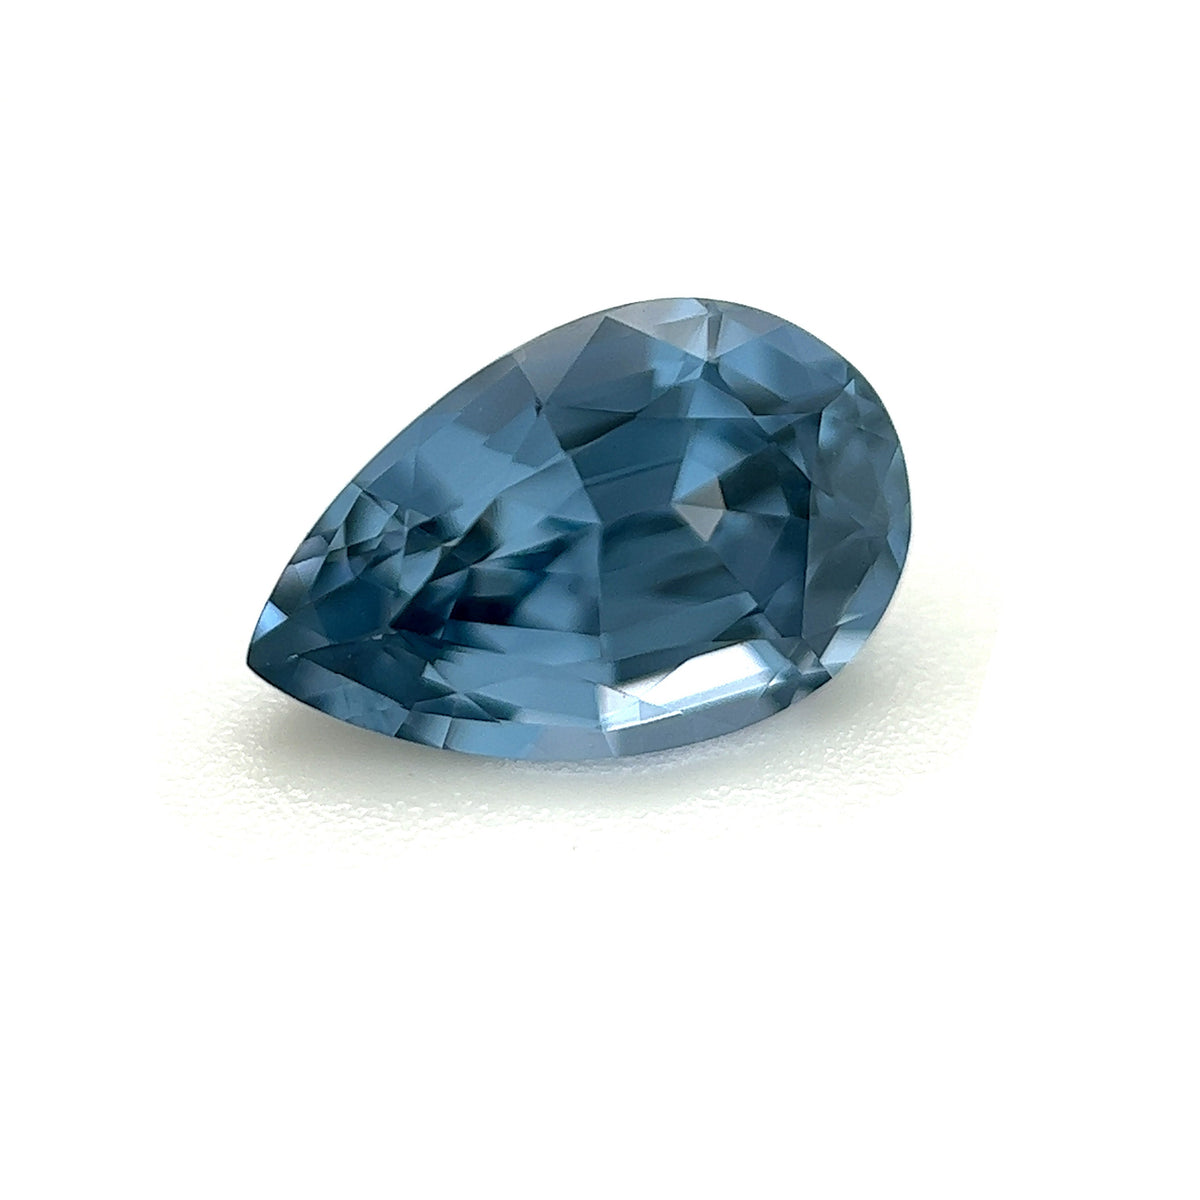 GIA Certified Mahenge Spinel